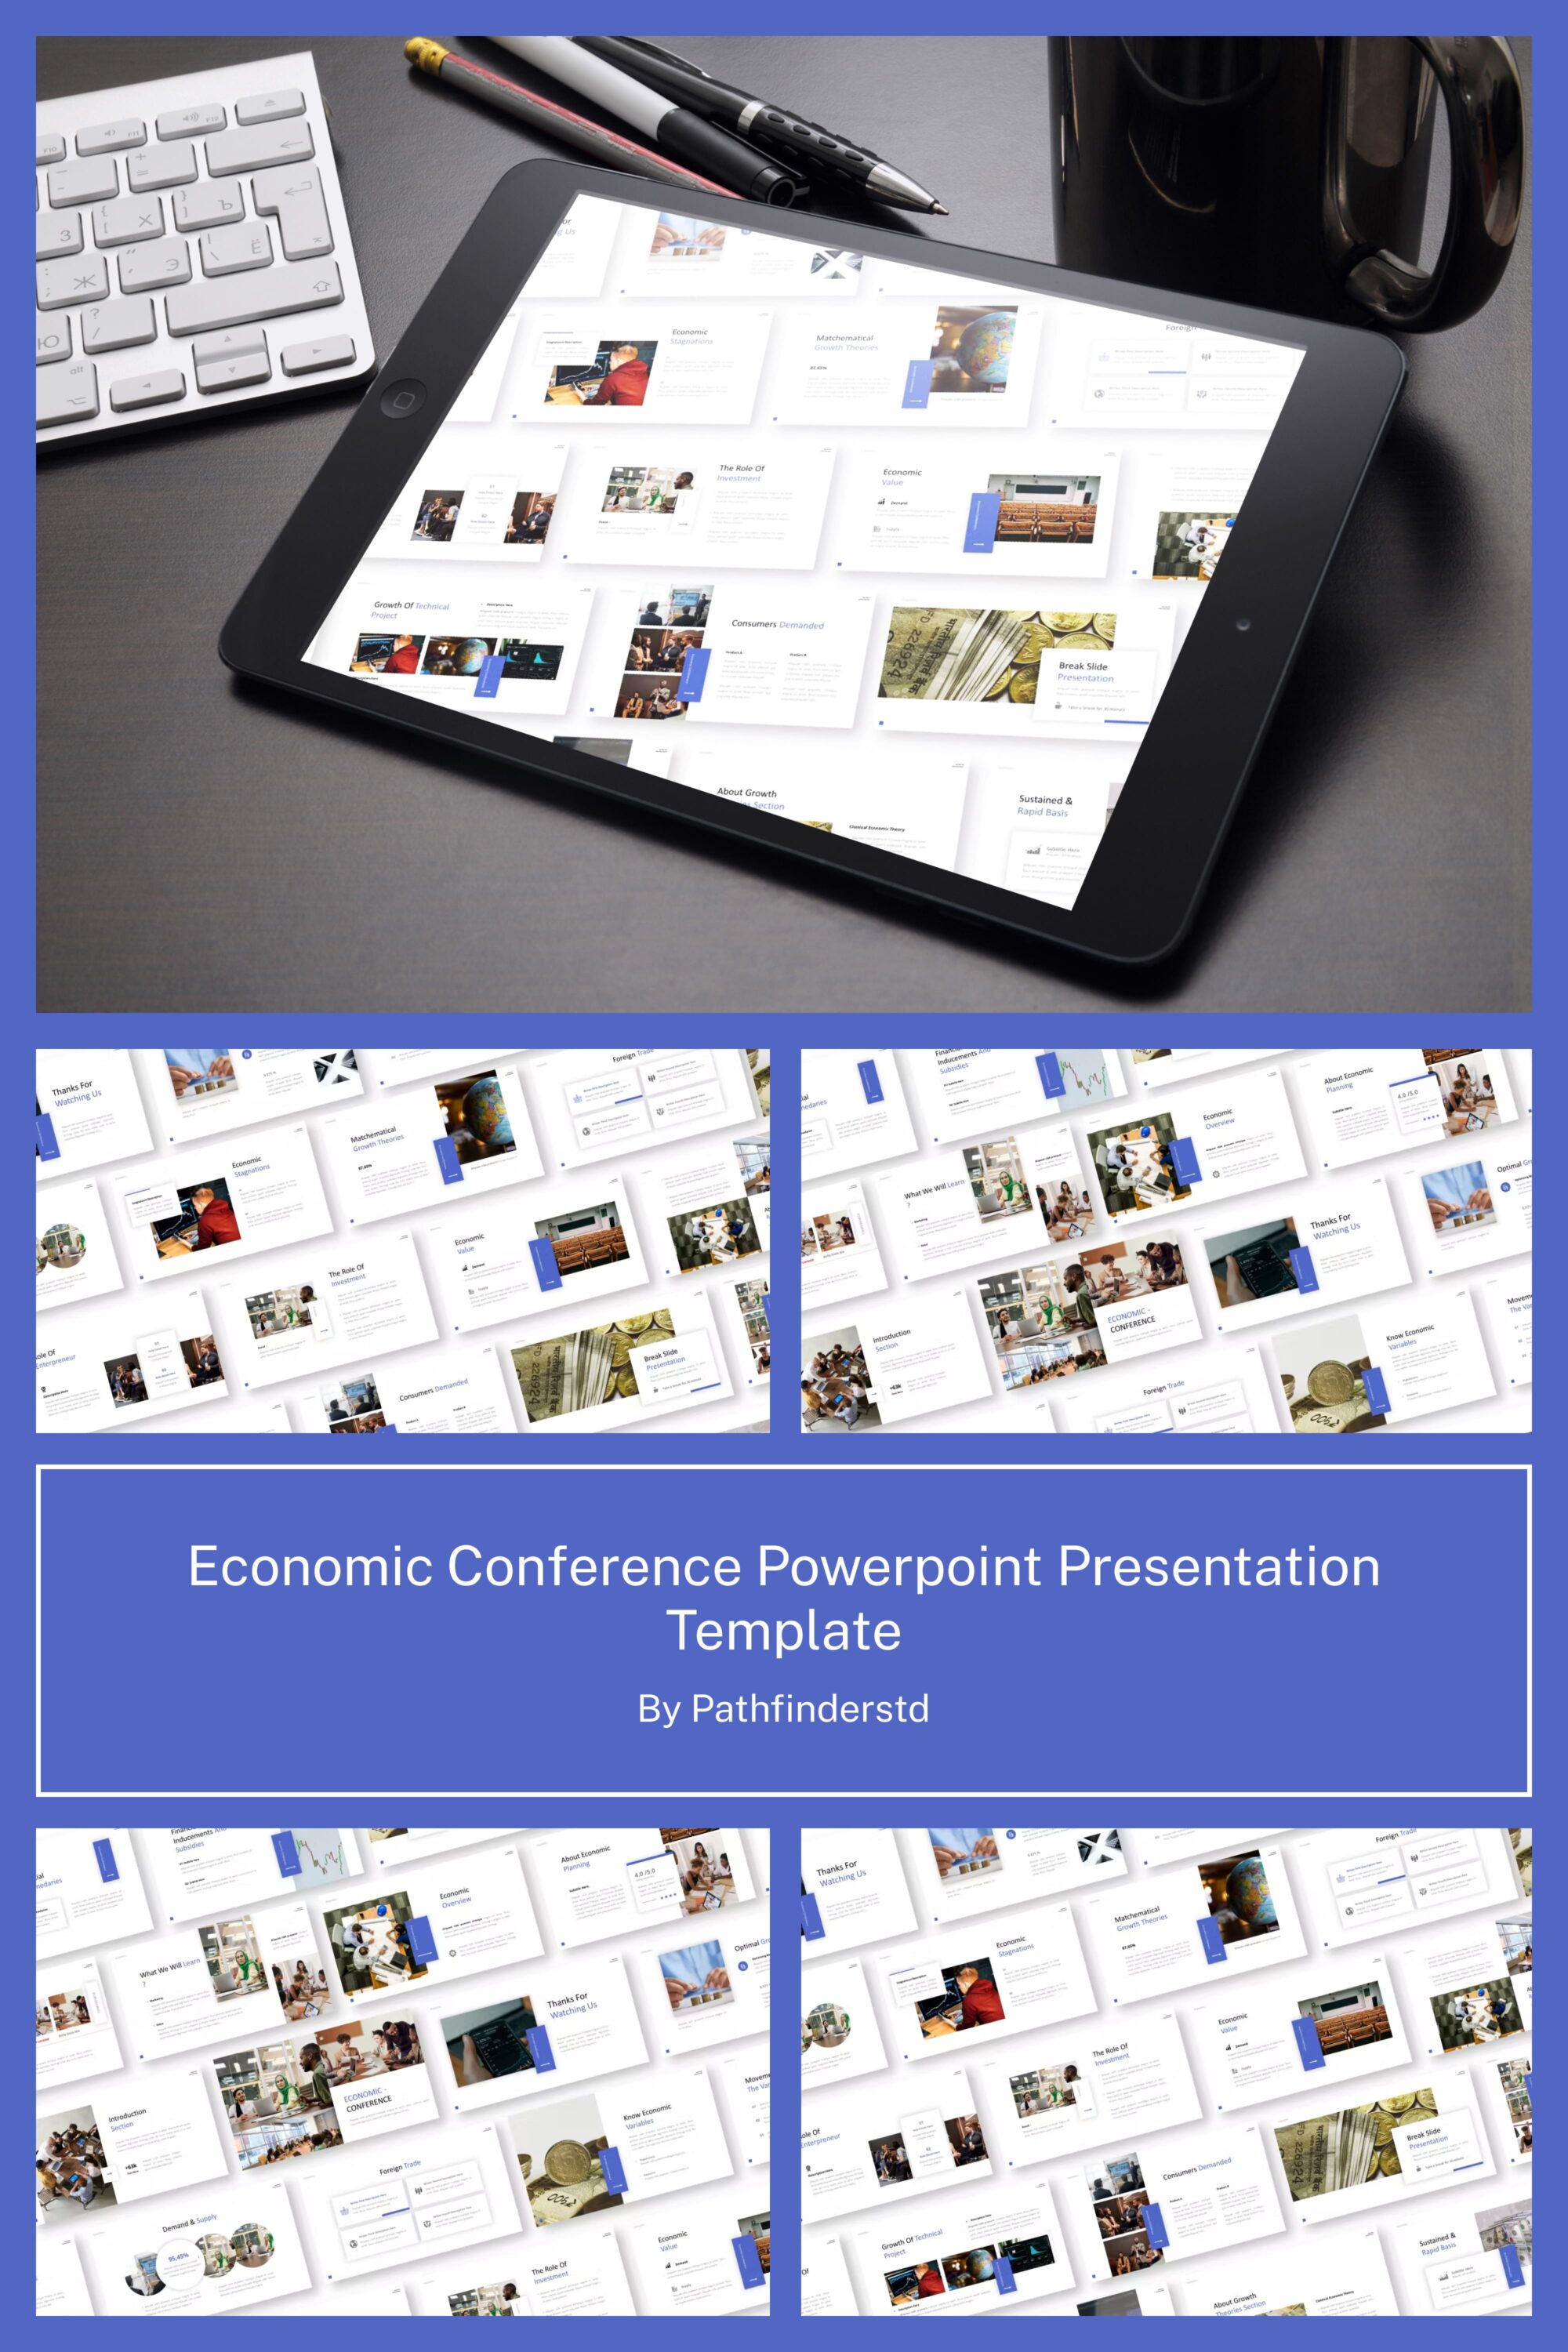 Economic conference powerpoint presentation template of pinterest.